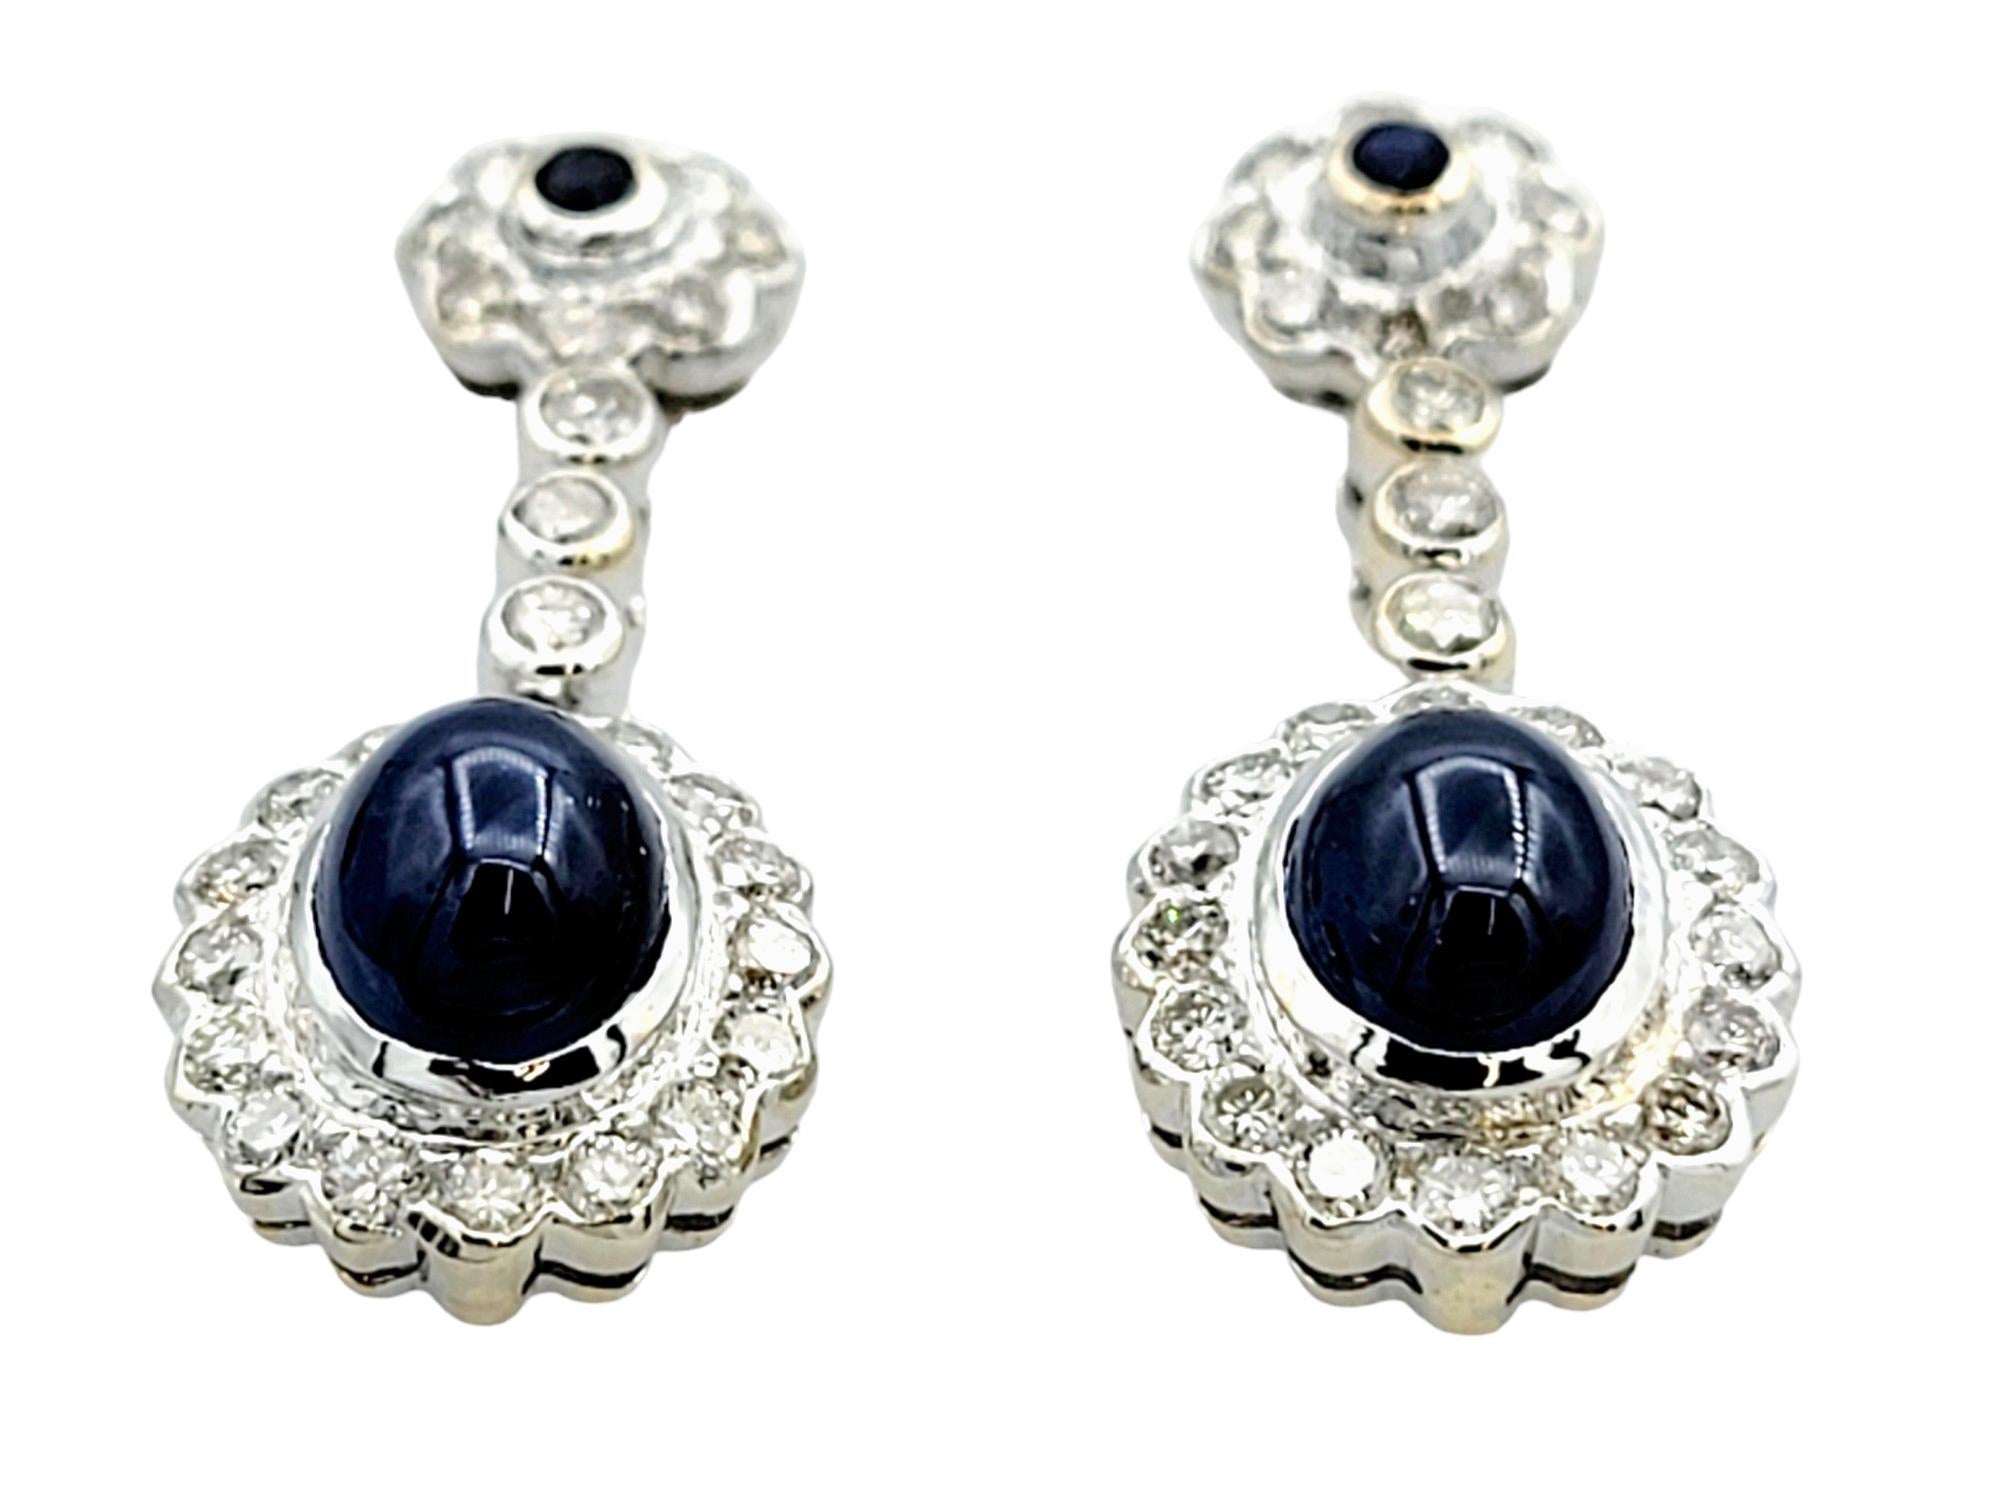 These exquisite dangle earrings, set in luxurious 18 karat white gold, are a harmonious blend of sophistication and intricate design. The focal point of each earring features an elegant oval cabochon sapphire, exuding a timeless allure and